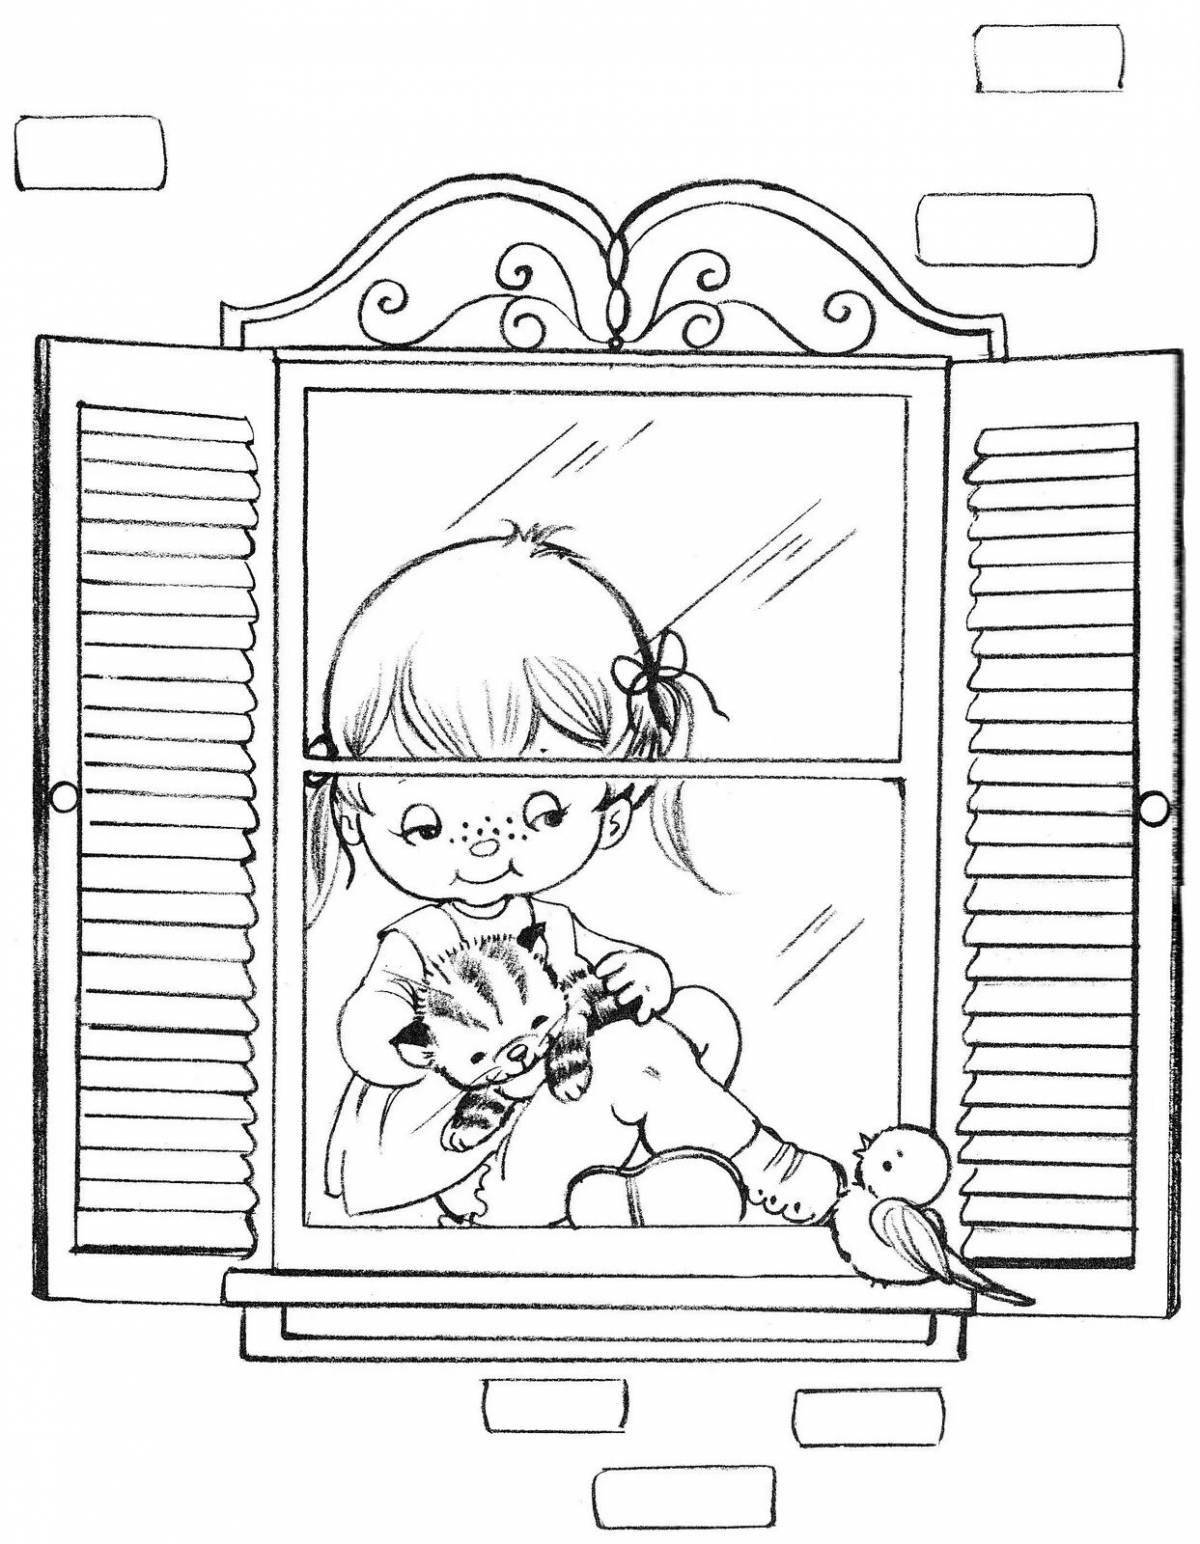 Colorful inspiration window coloring book for kids